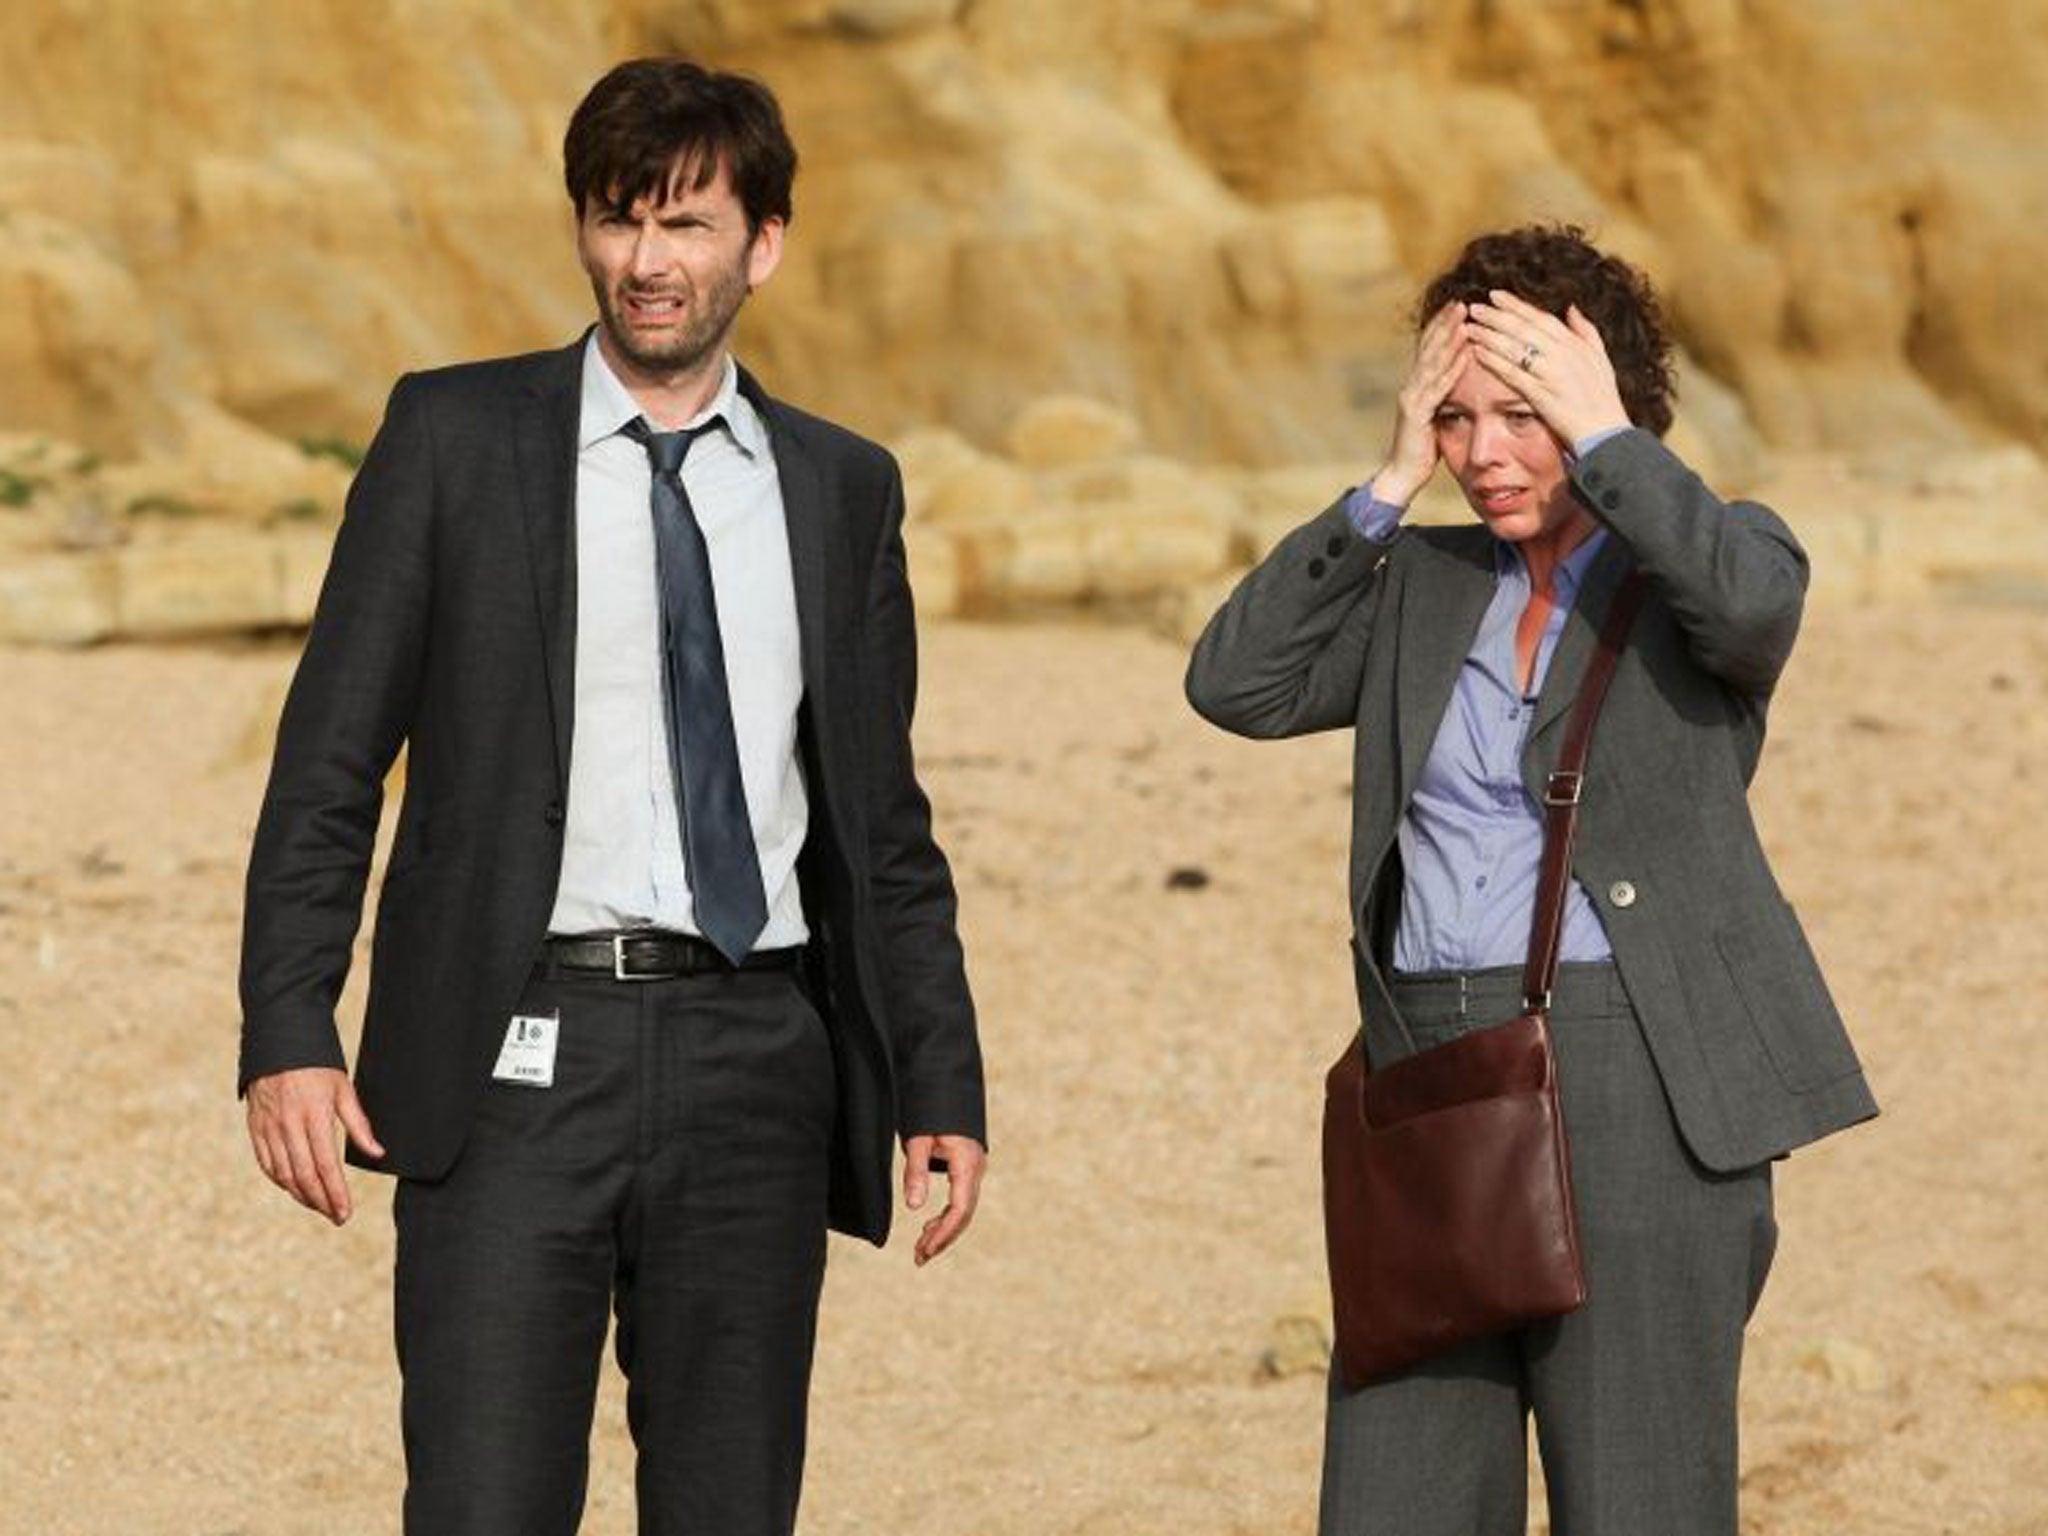 Could it be Broadchurch's night? David Tennant and Olivia Colman are both up for awards with the ITV show nominated for Best Drama